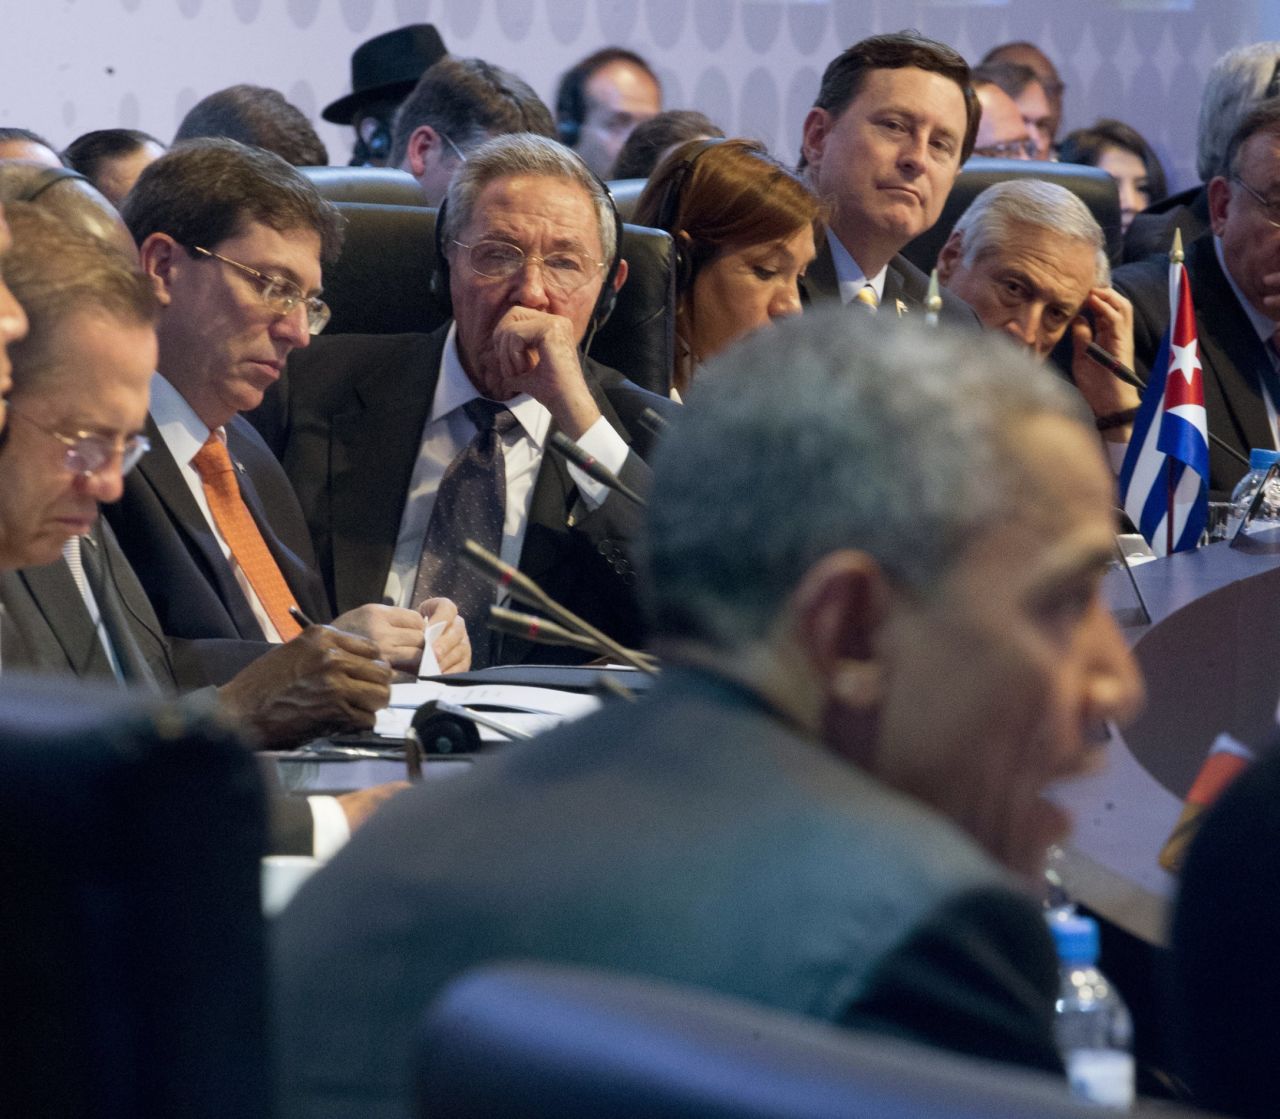 Obama joins other world leaders for the opening plenary of the Summit of the Americas on April 11. Castro, center, and Cuban Foreign Minister Bruno Rodriguez, left, are among those listening to Obama's remarks.